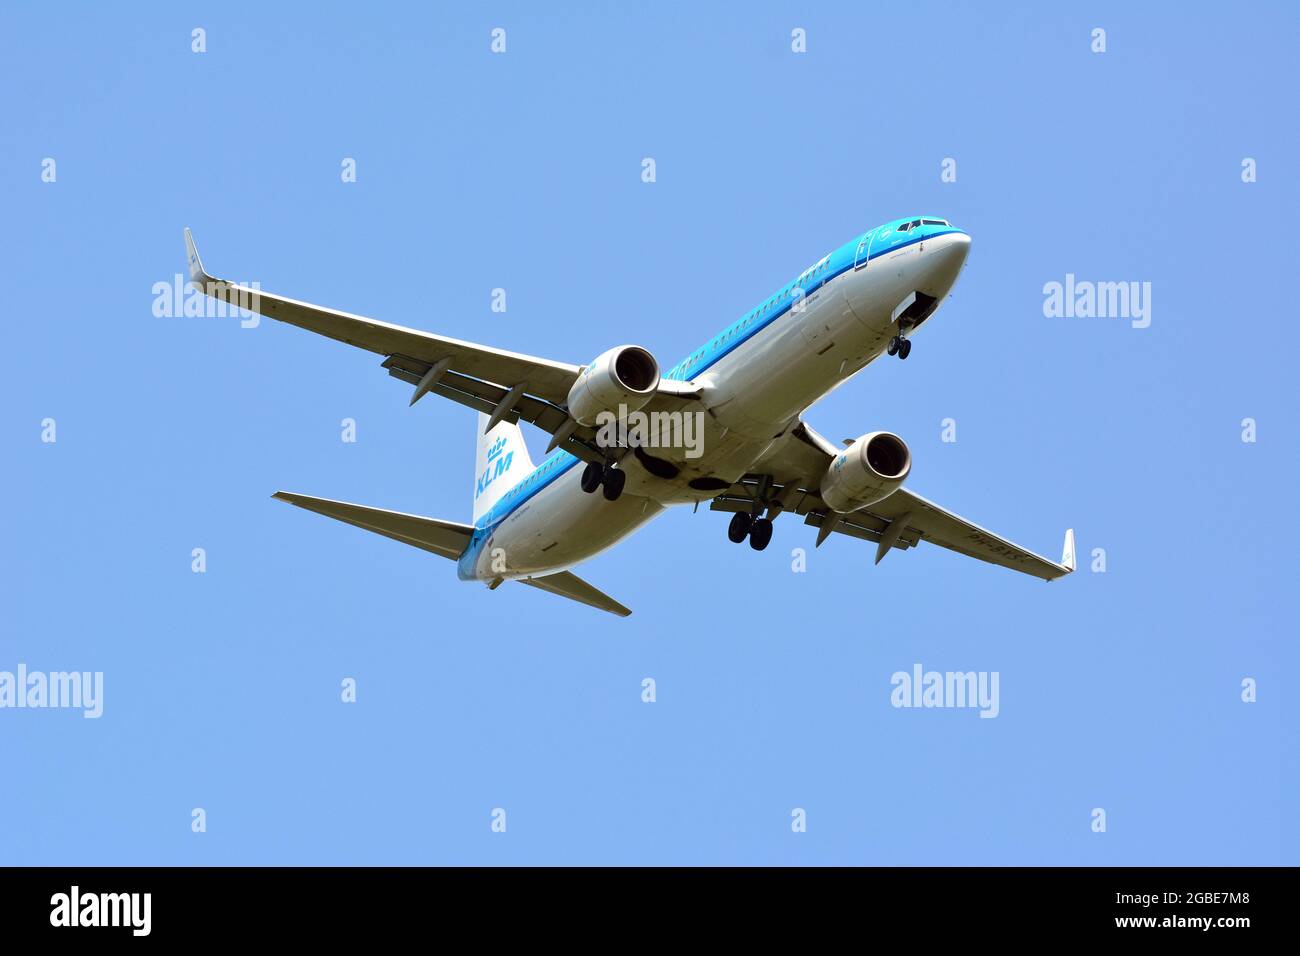 Klm Royal Dutch Airlines (Is The Flag Carrier Airline Of The Netherlands),  Boeing 737-900 Airplane Stock Photo - Alamy